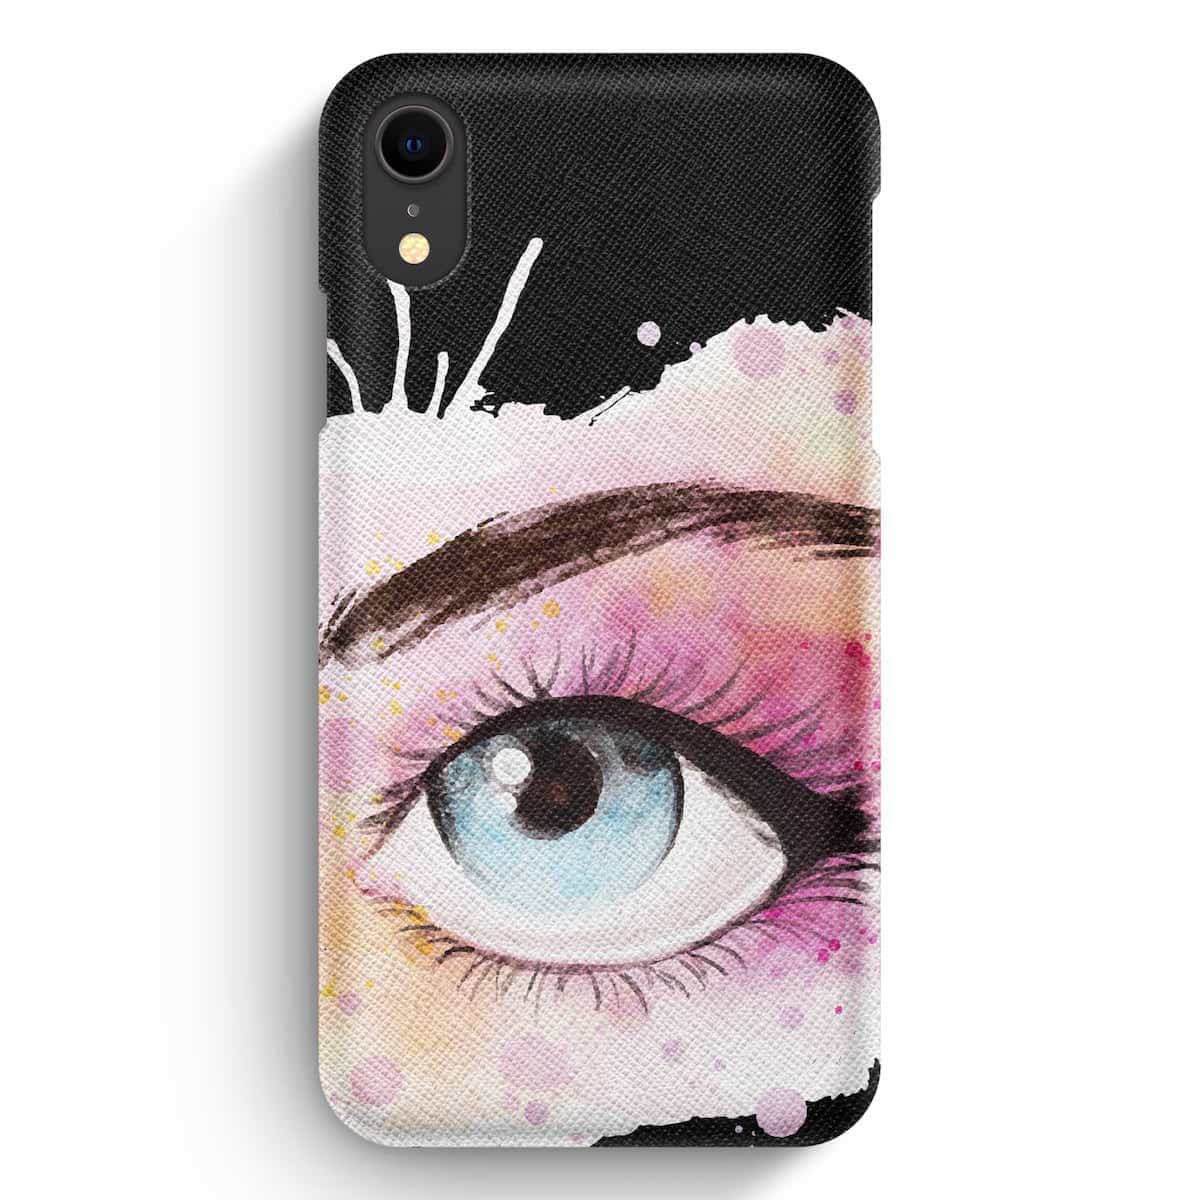 Mobile Mob True Envy iPhone XR Case - Window of the Soul 